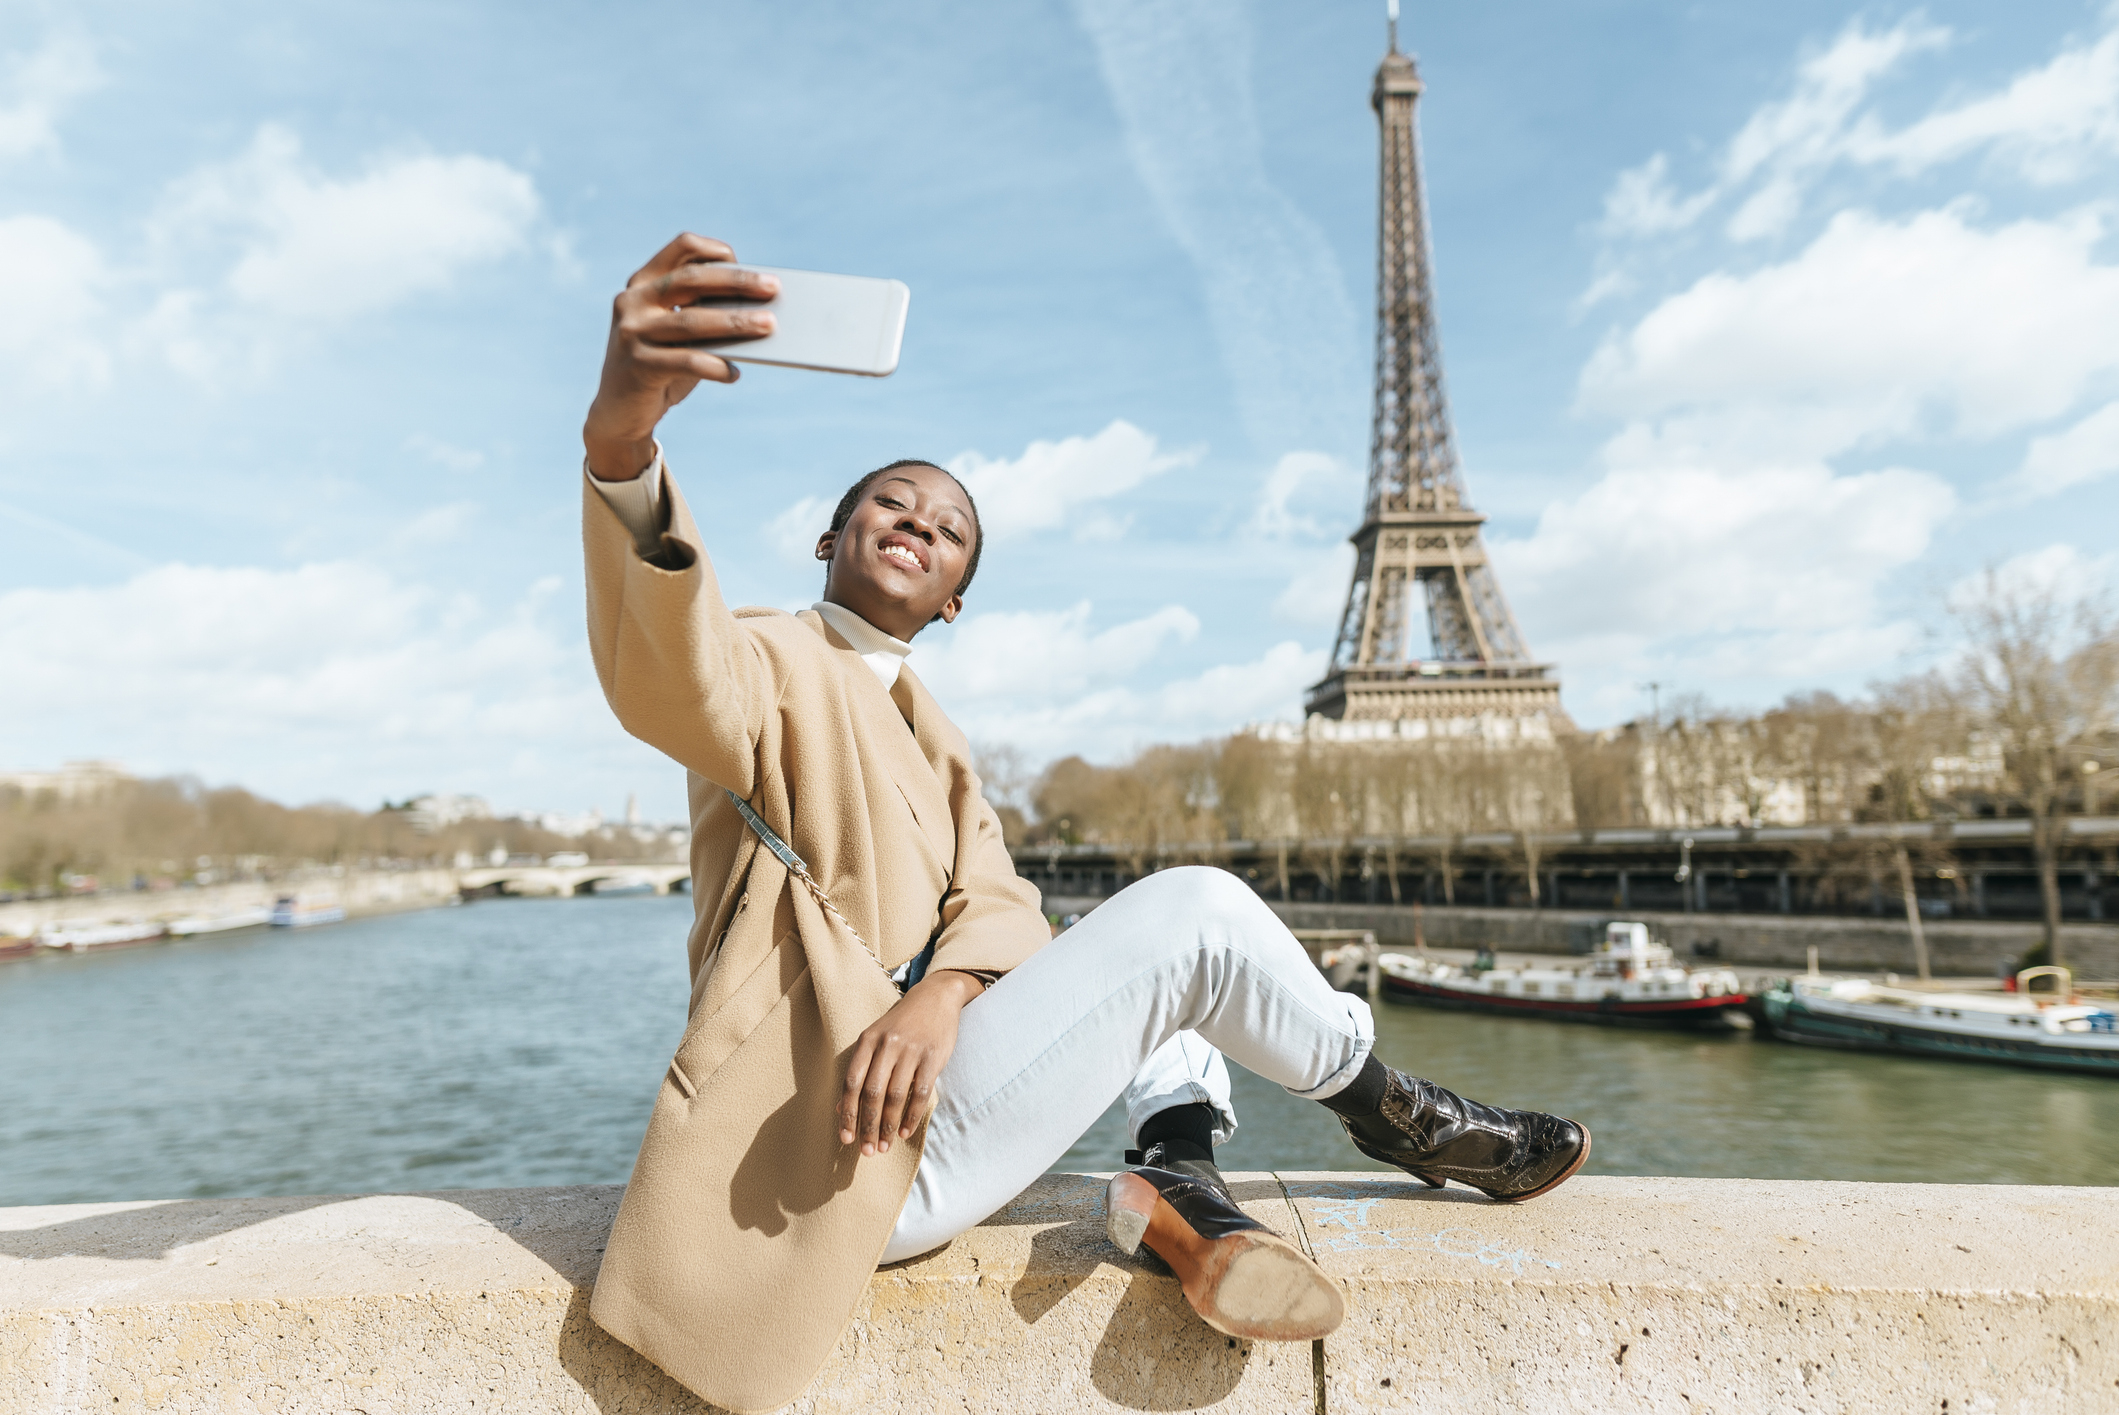 A person takes a selfie while sitting on a ledge by the Eiffel Tower. They wear a light coat, white pants, and black shoes. The sky is partly cloudy